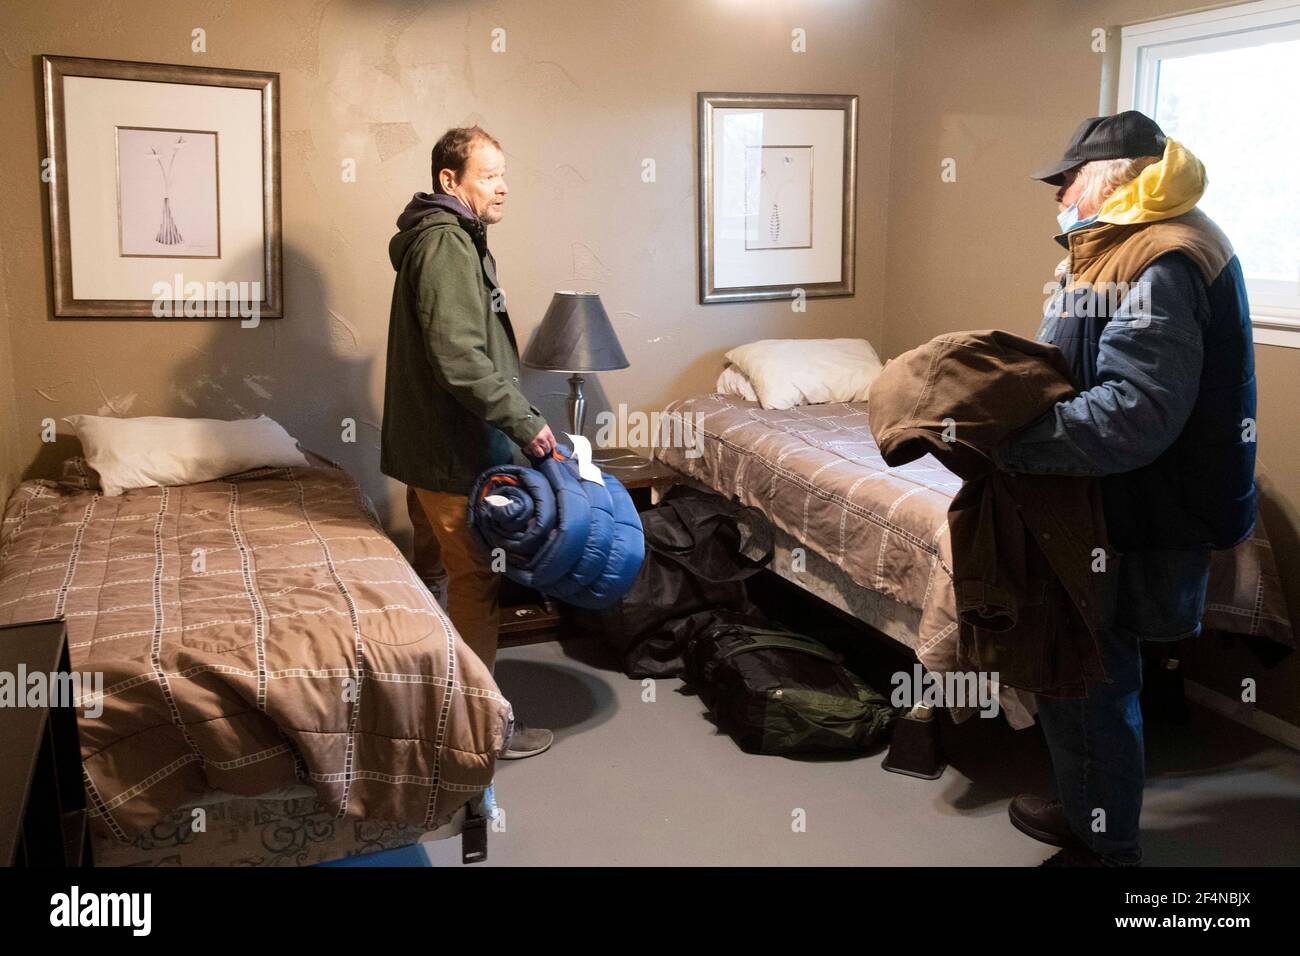 Austin, TX USA Feb 20, 2021: Homeless veterans arrive for their first night at a privately-run sober house after spending a week at a church-run warming shelter during Austin's recent severe winter weather. Church members arranged for the new accommodations after both men requested help for their alcoholism. Stock Photo